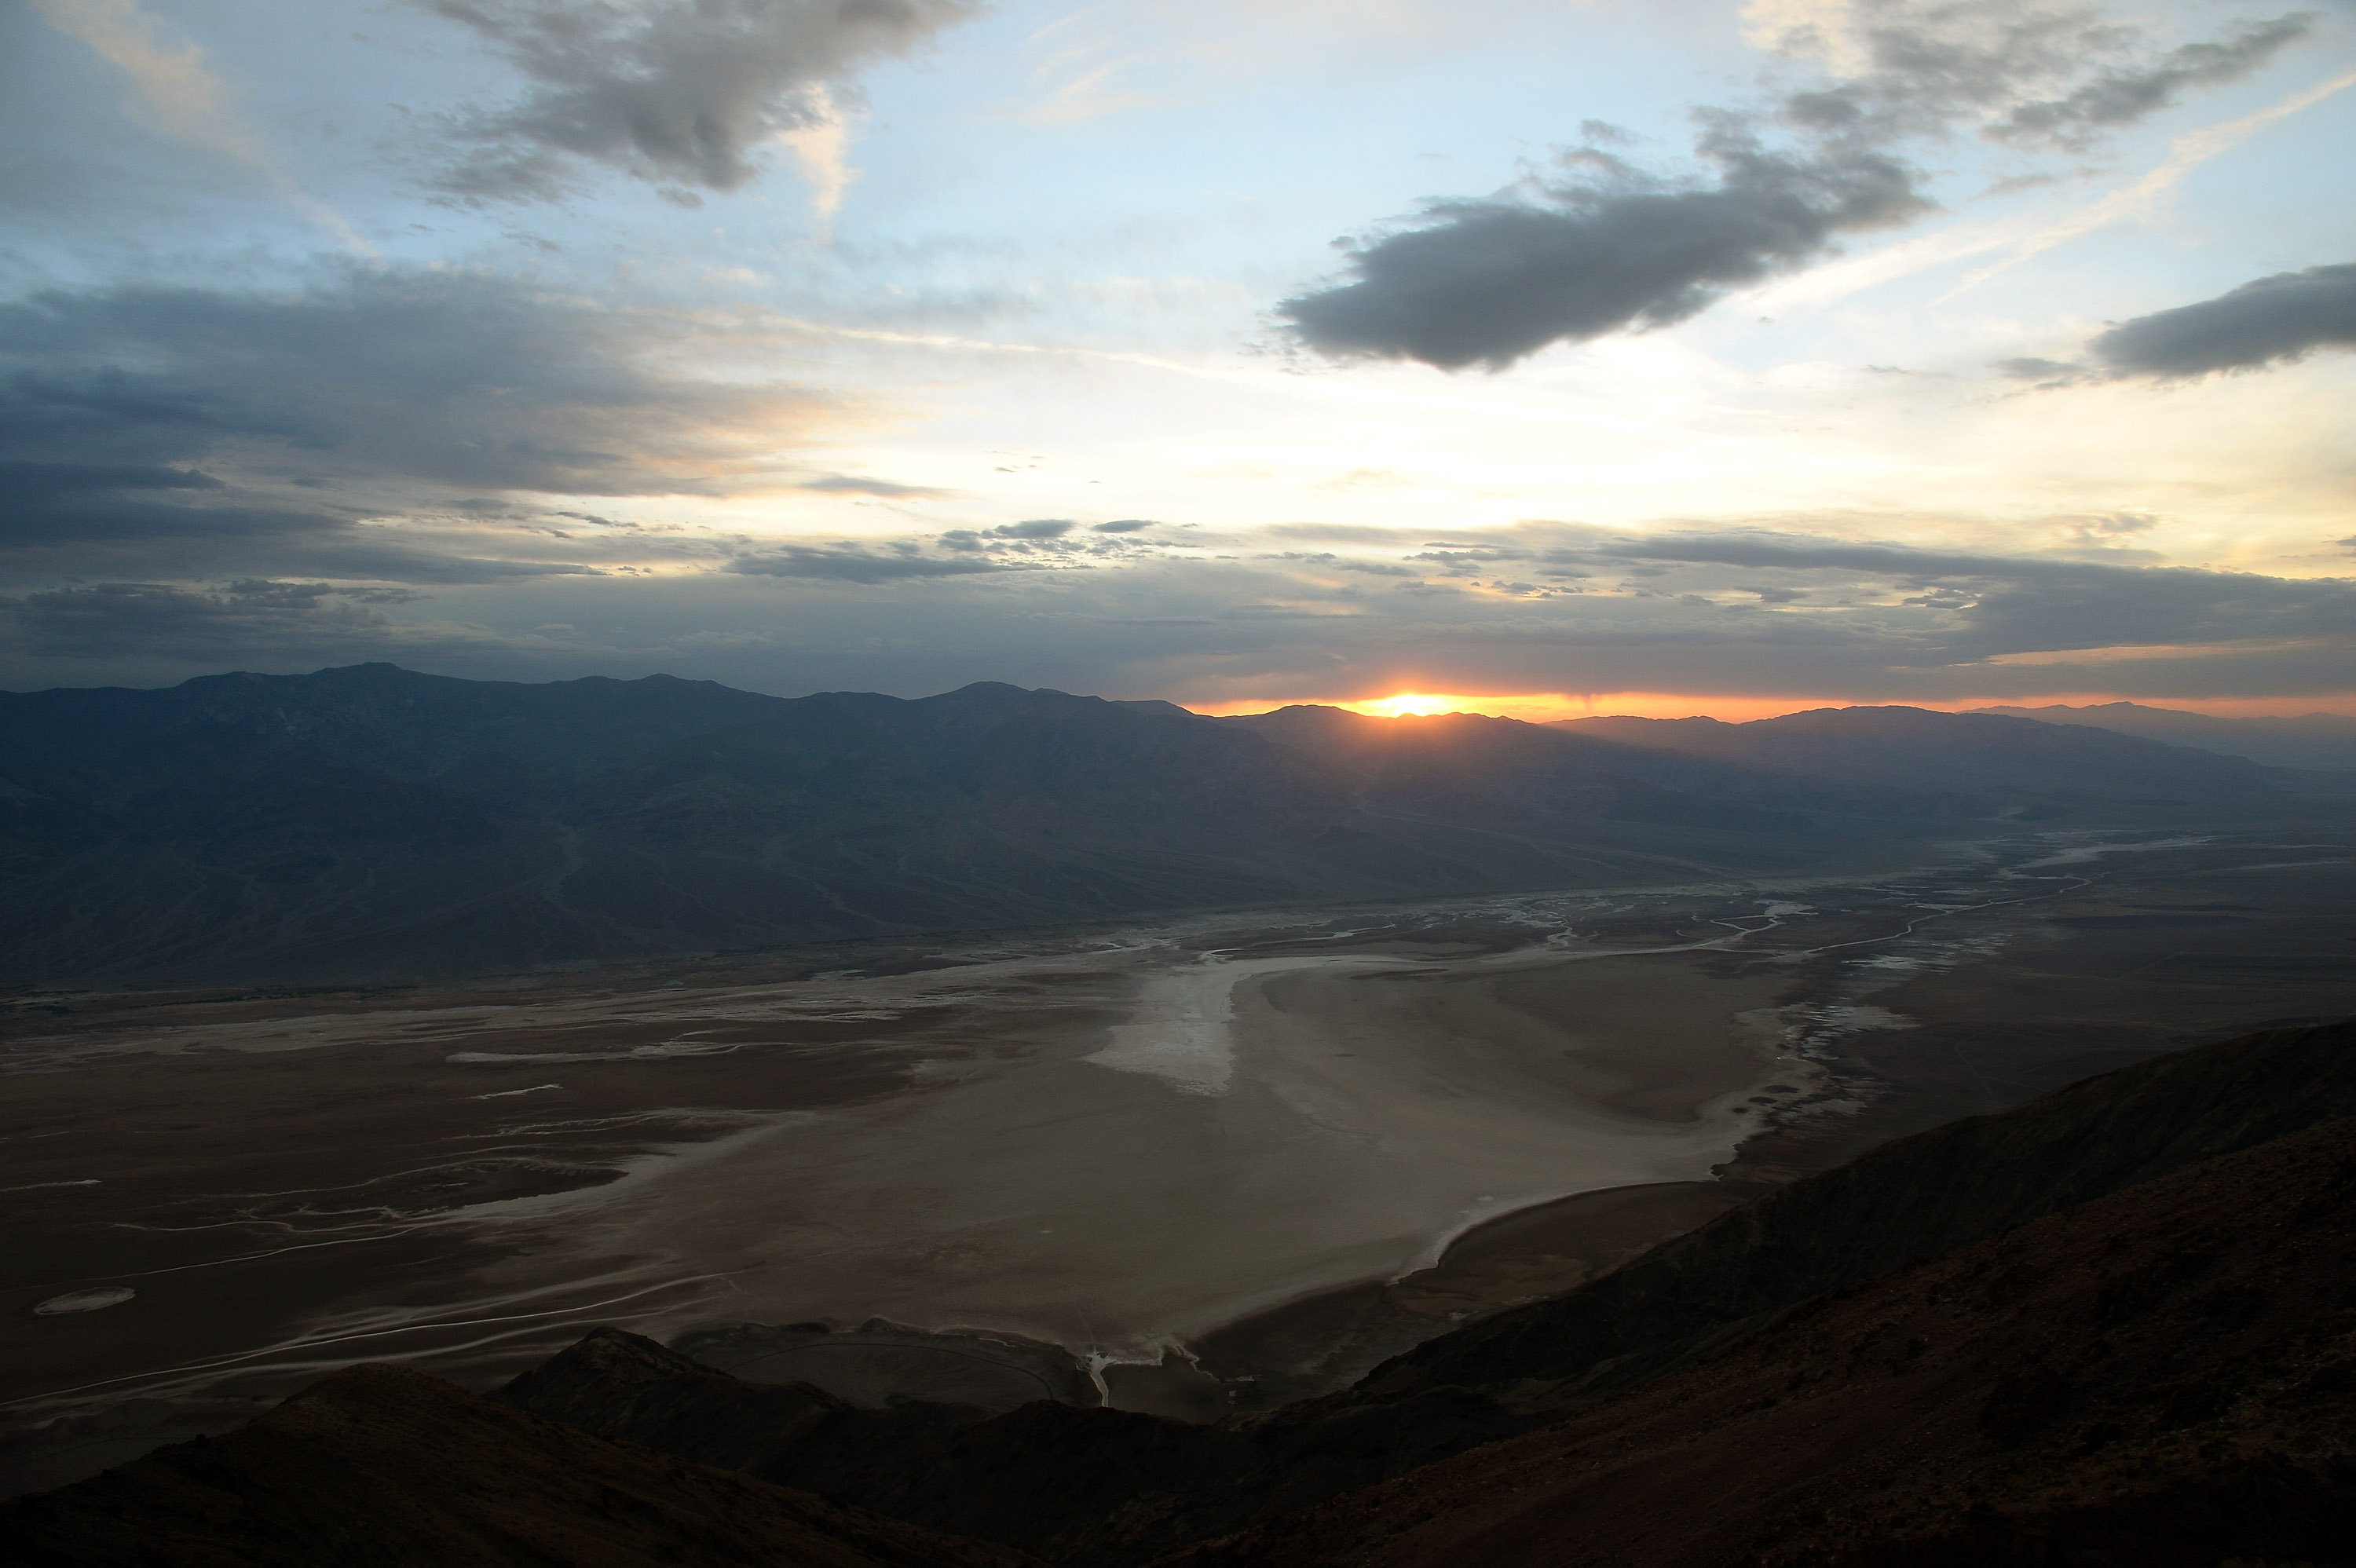 Views Of Badwater Basin And Dante's View In Death Valley